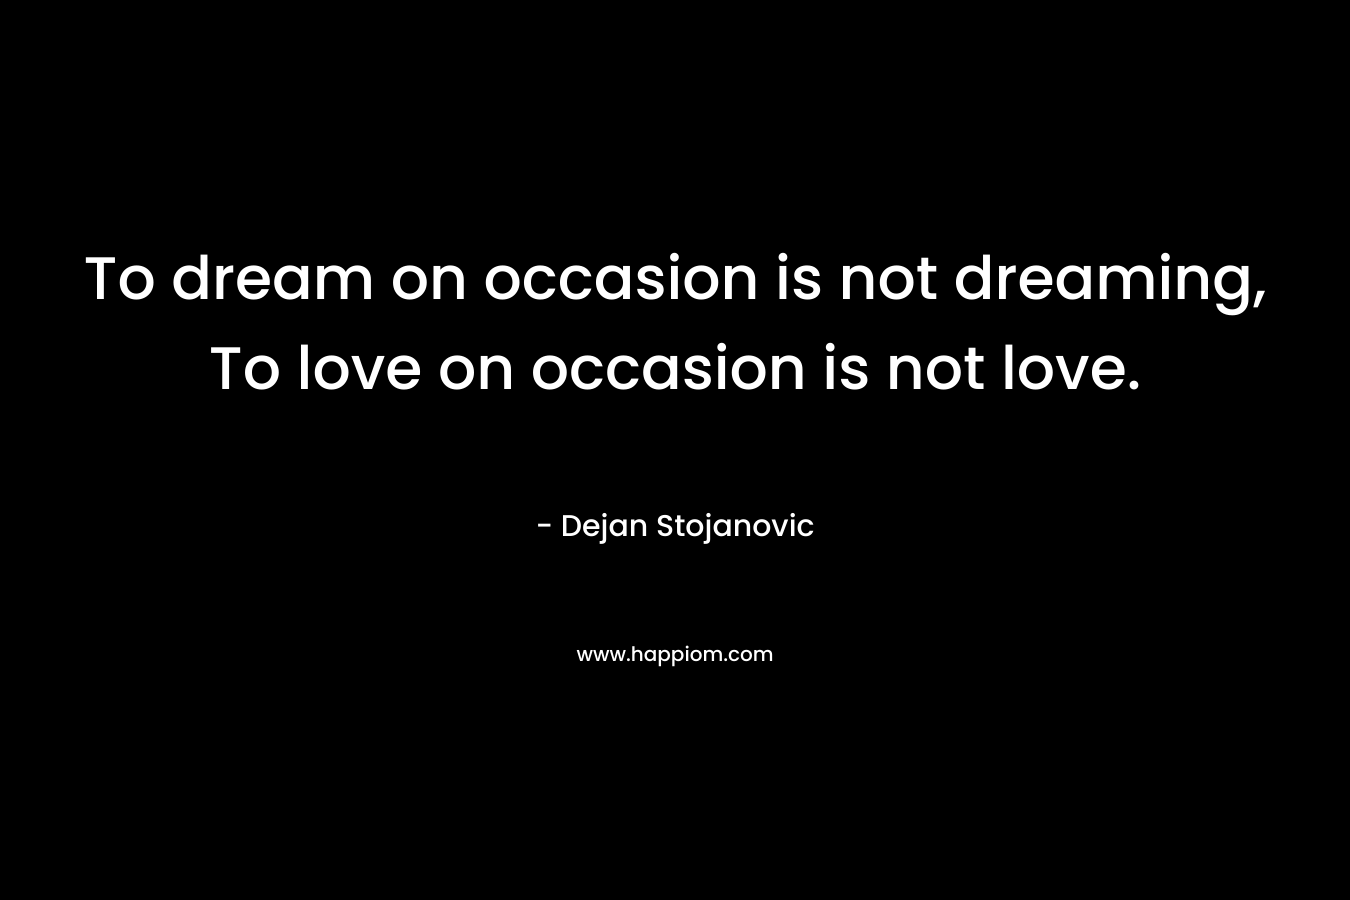 To dream on occasion is not dreaming, To love on occasion is not love.